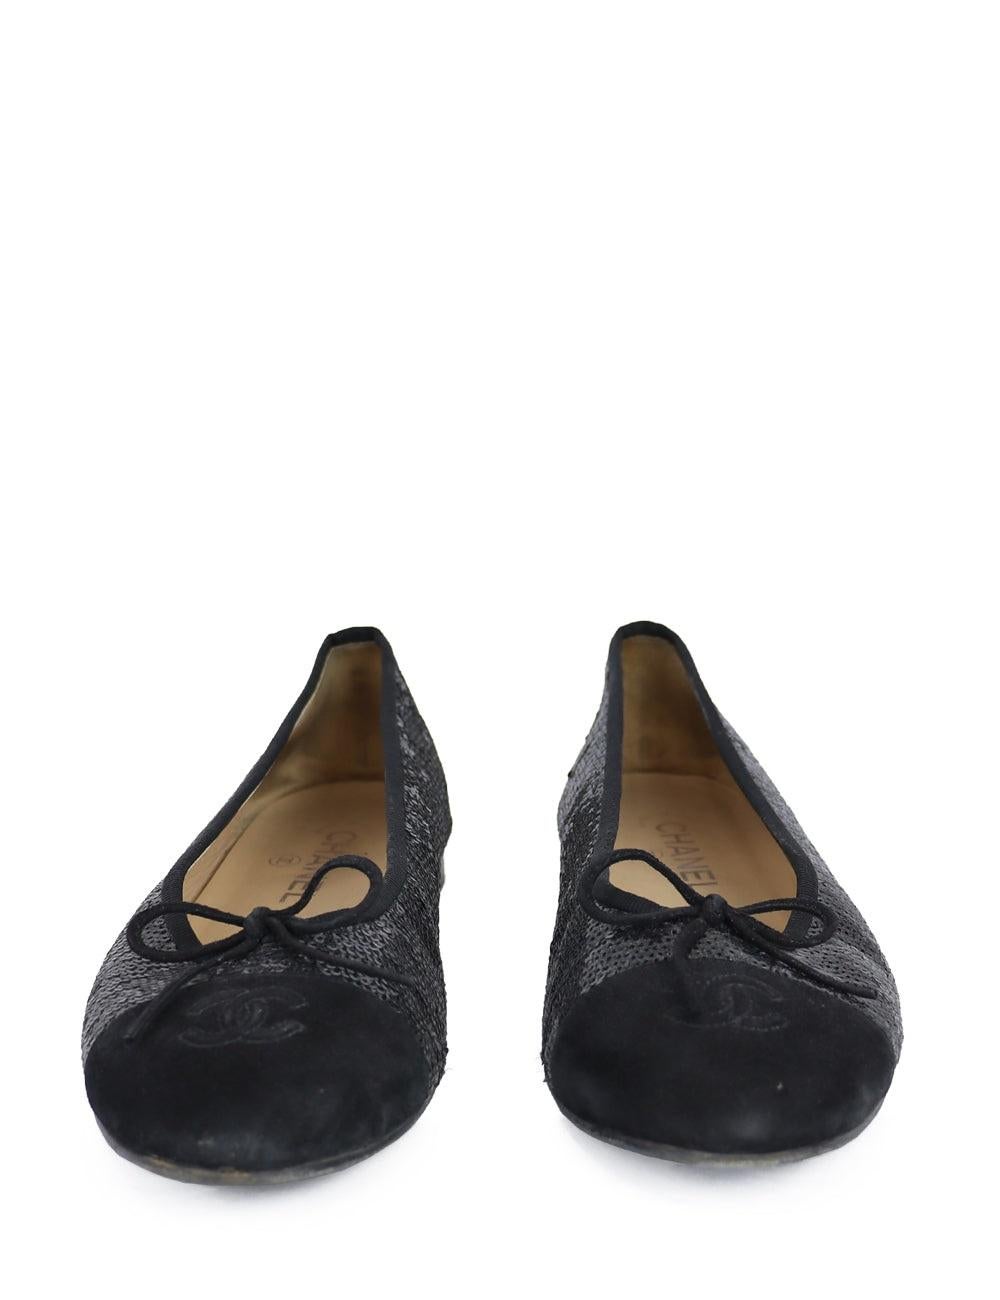 Chanel black sequin and suede cap toe flats. Featuring classic CC logo at front with little black bow. 

Additional information:
Material: Leather
Size: EU 40.5 / US 9.5
Overall Condition: Excellent 
Interior Condition: Excellent 
Exterior